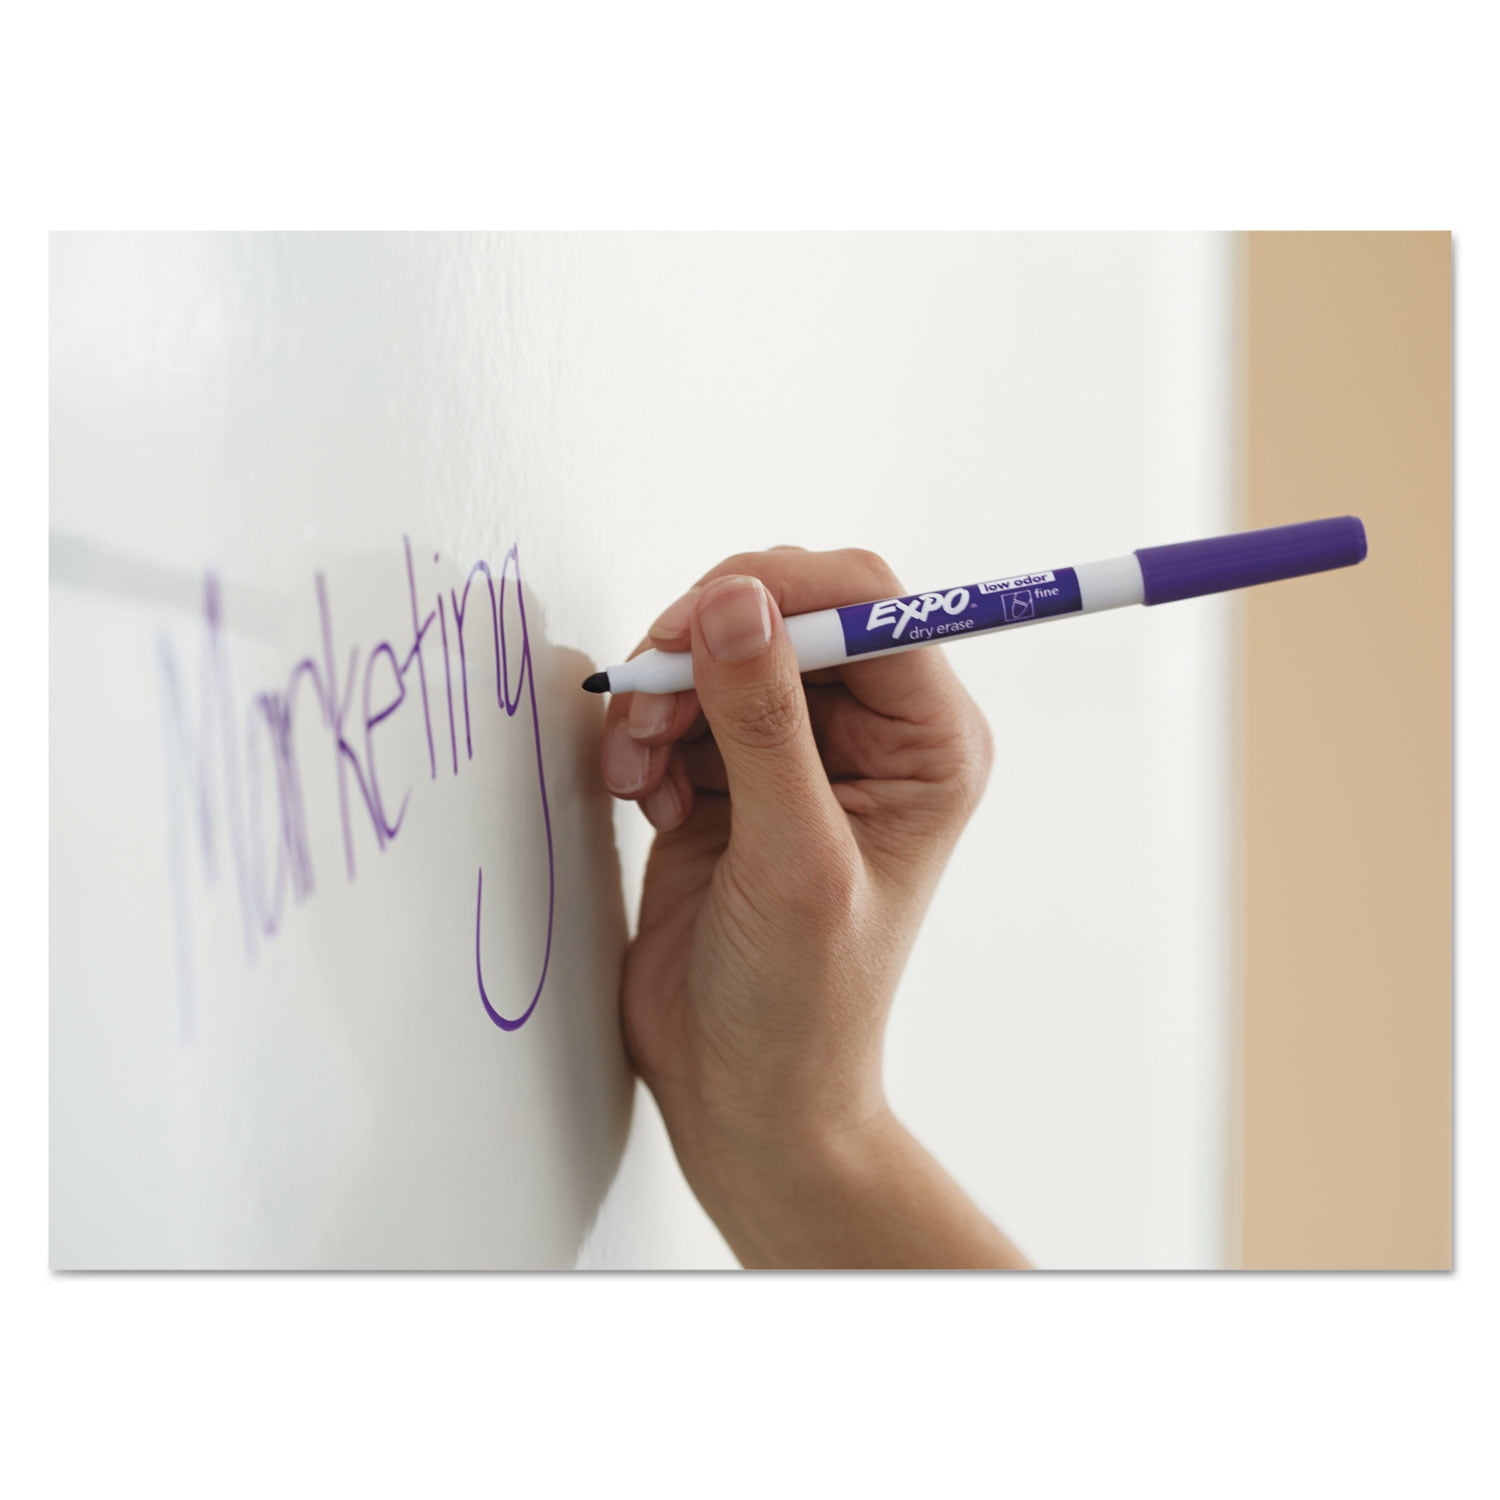 Expo2® Fine-Tip Dry-Erase Markers